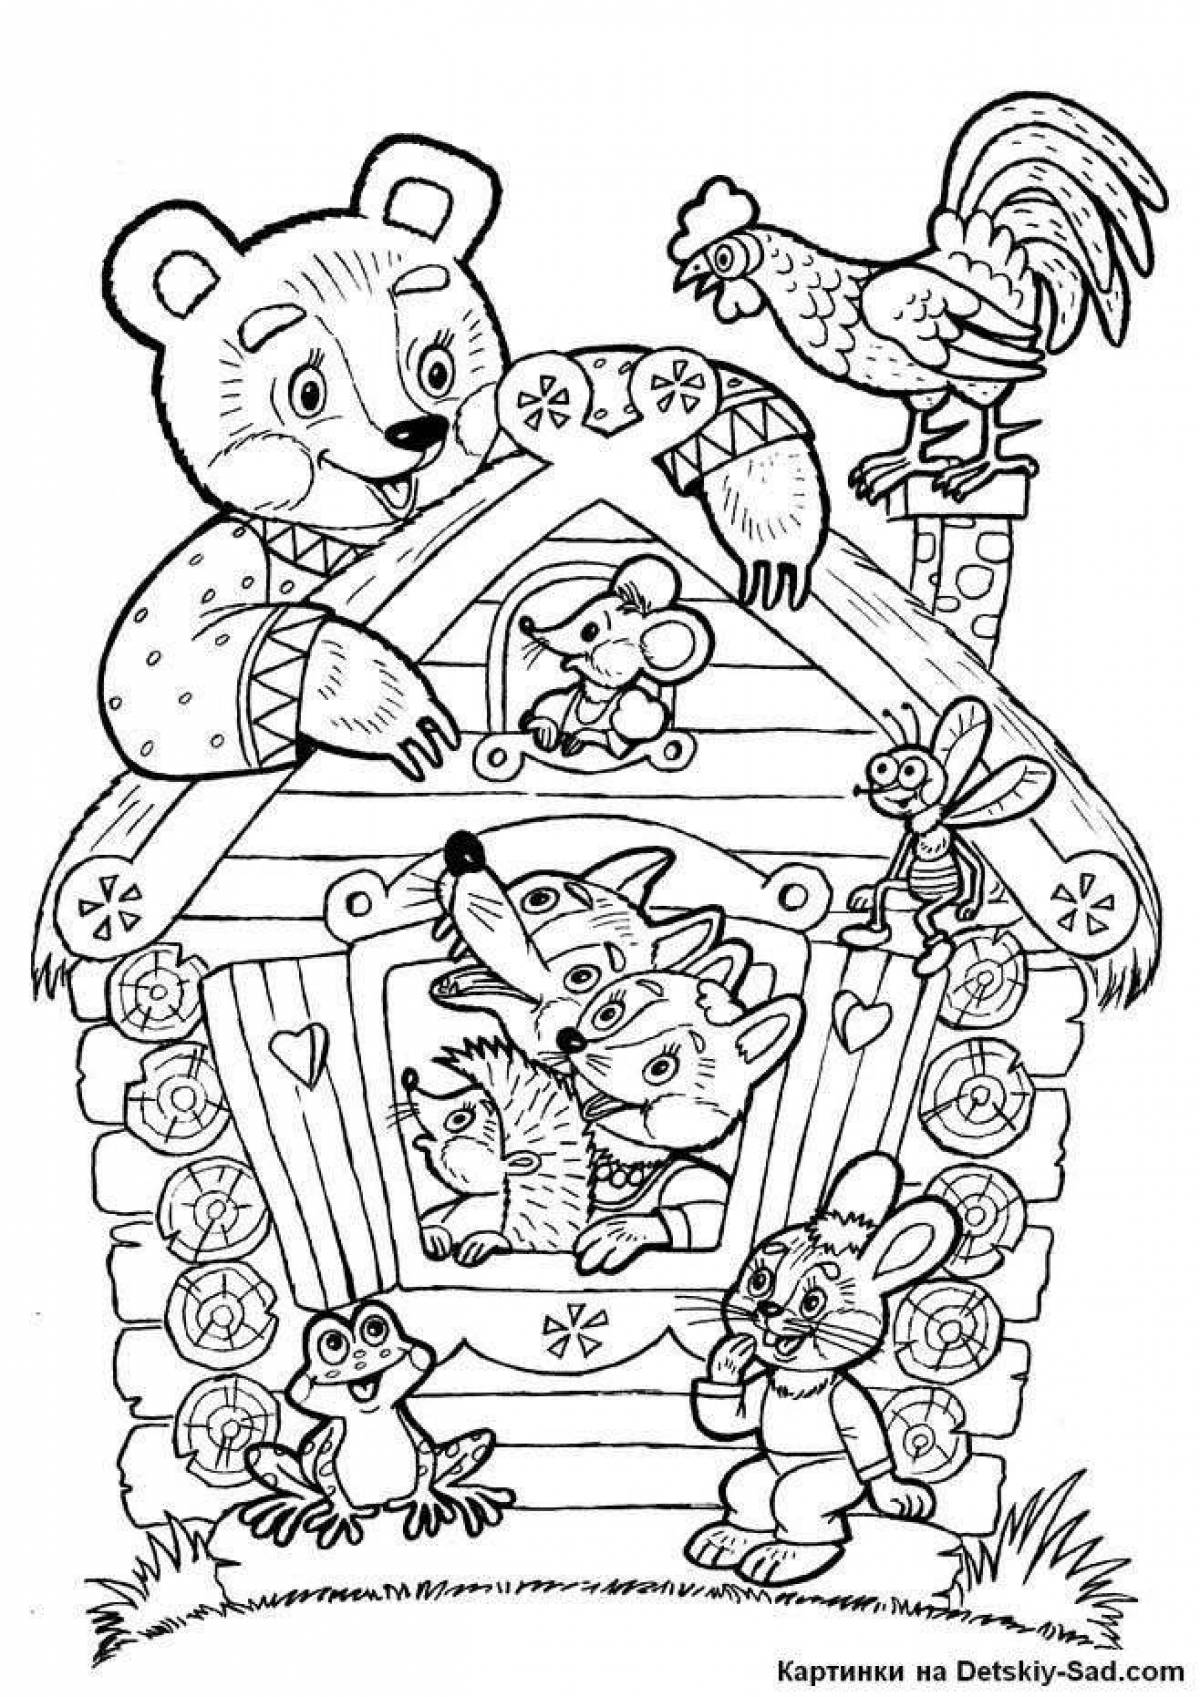 A fascinating coloring book based on fairy tales